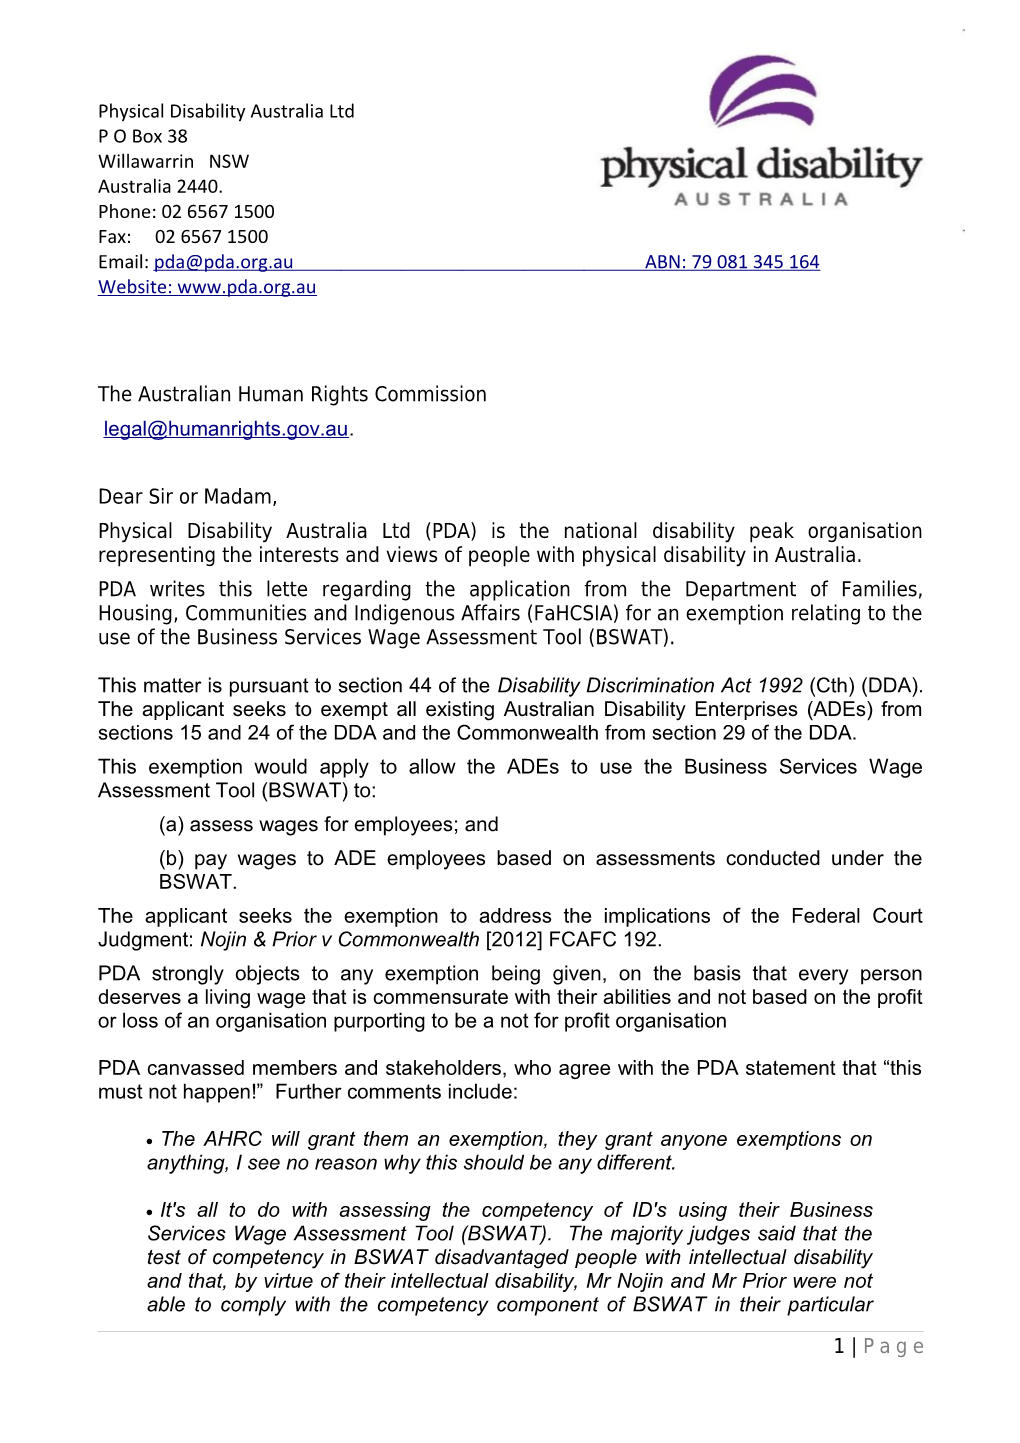 The Australian Human Rights Commission